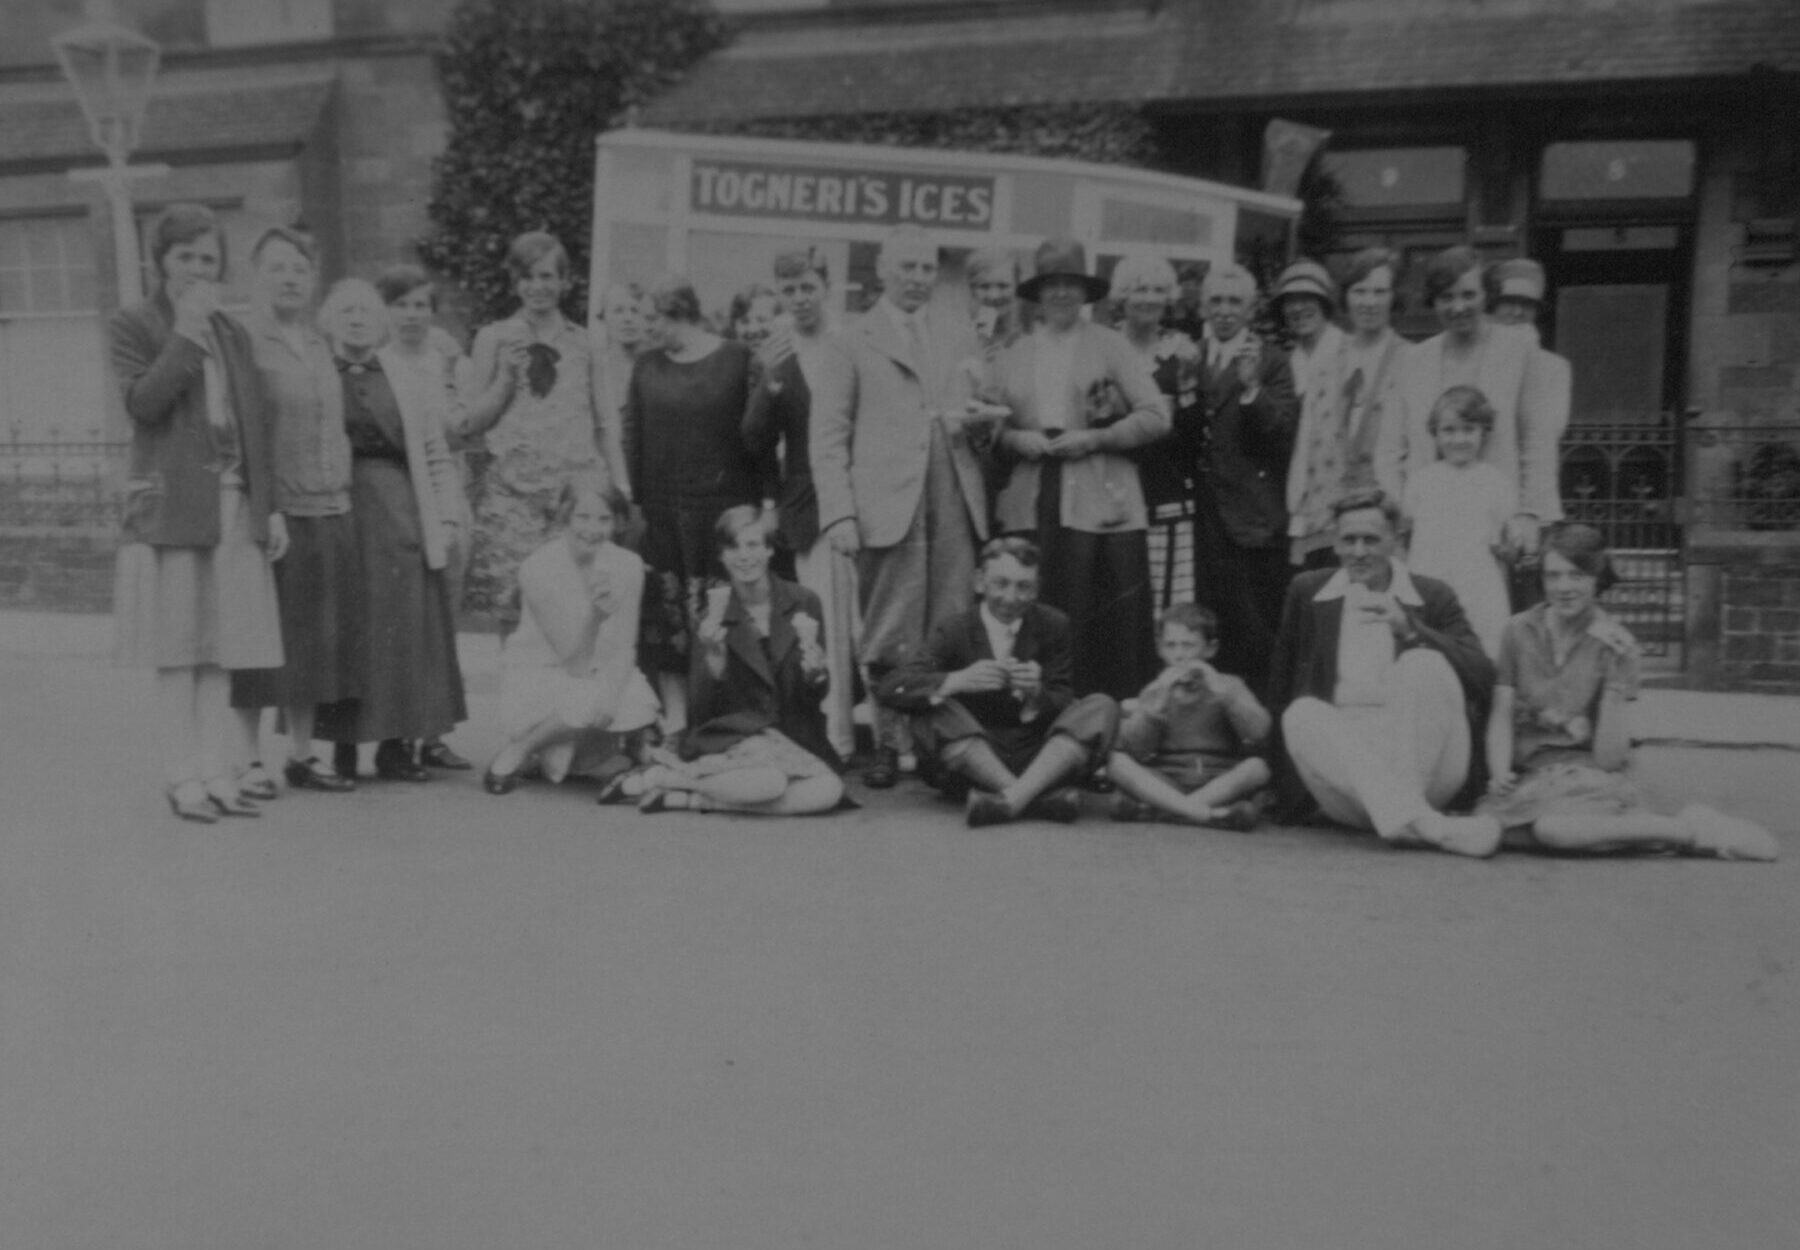 A black and white archive photo of a group of people standing in front of an ice cream van